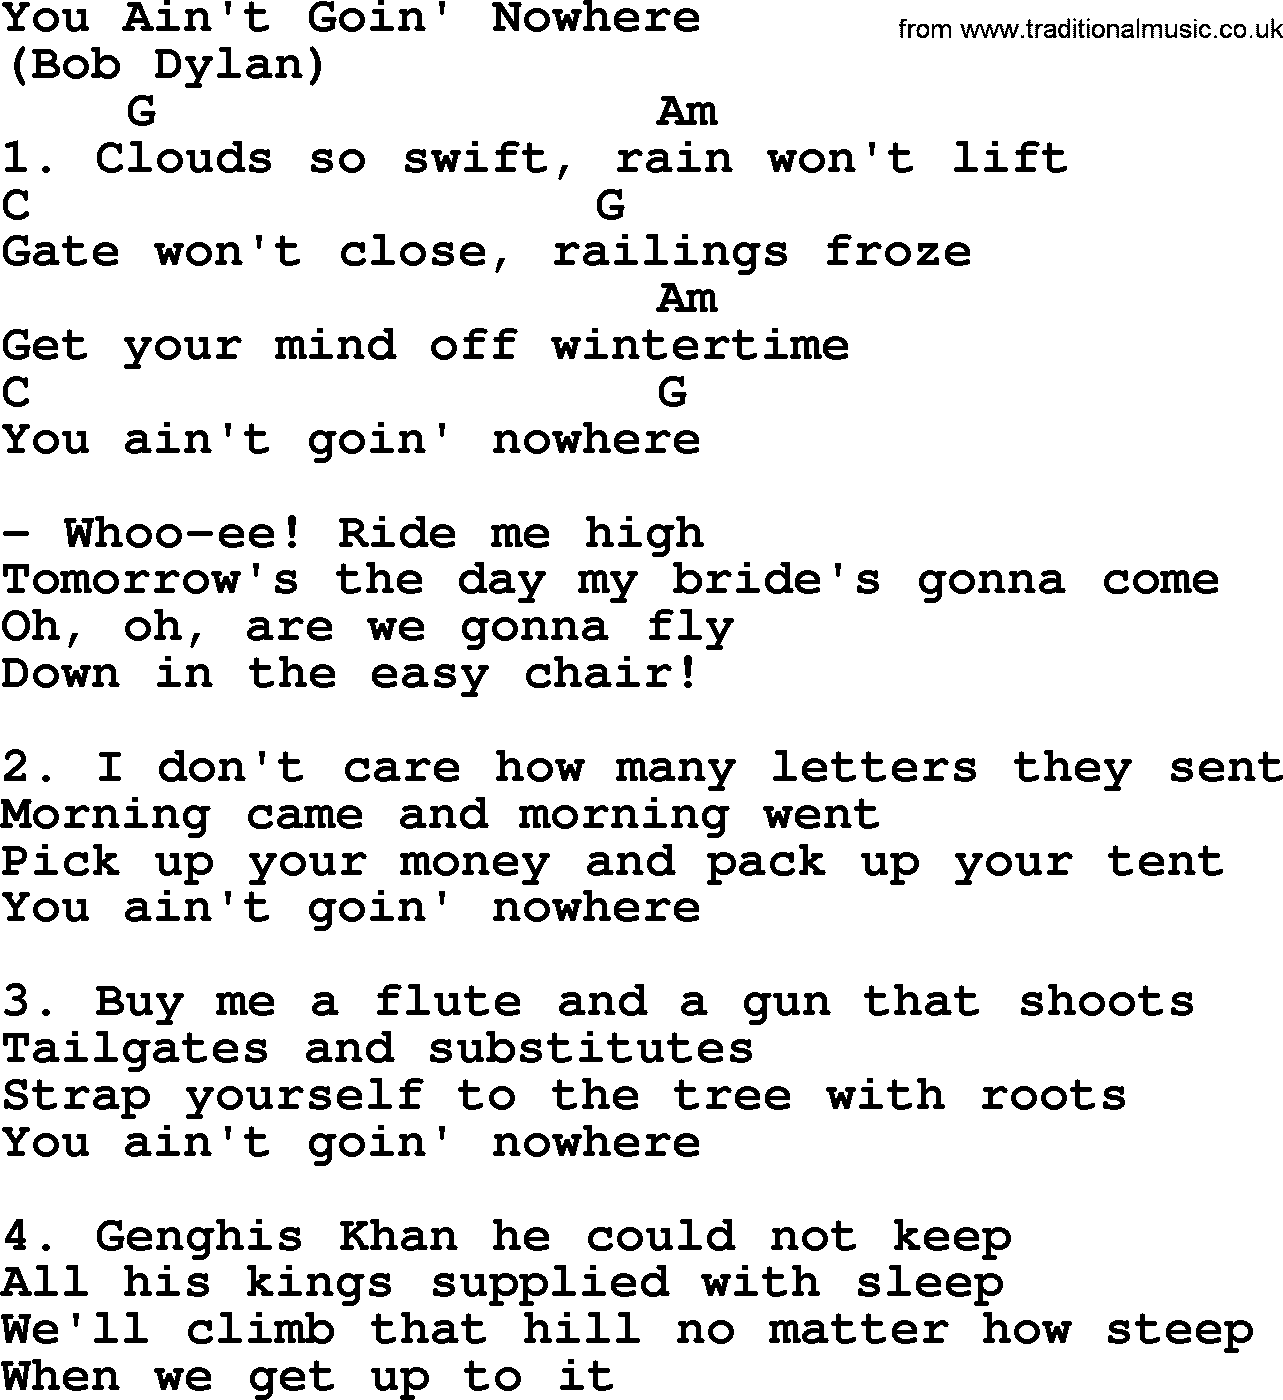 The Byrds song You Ain't Goin' Nowhere, lyrics and chords